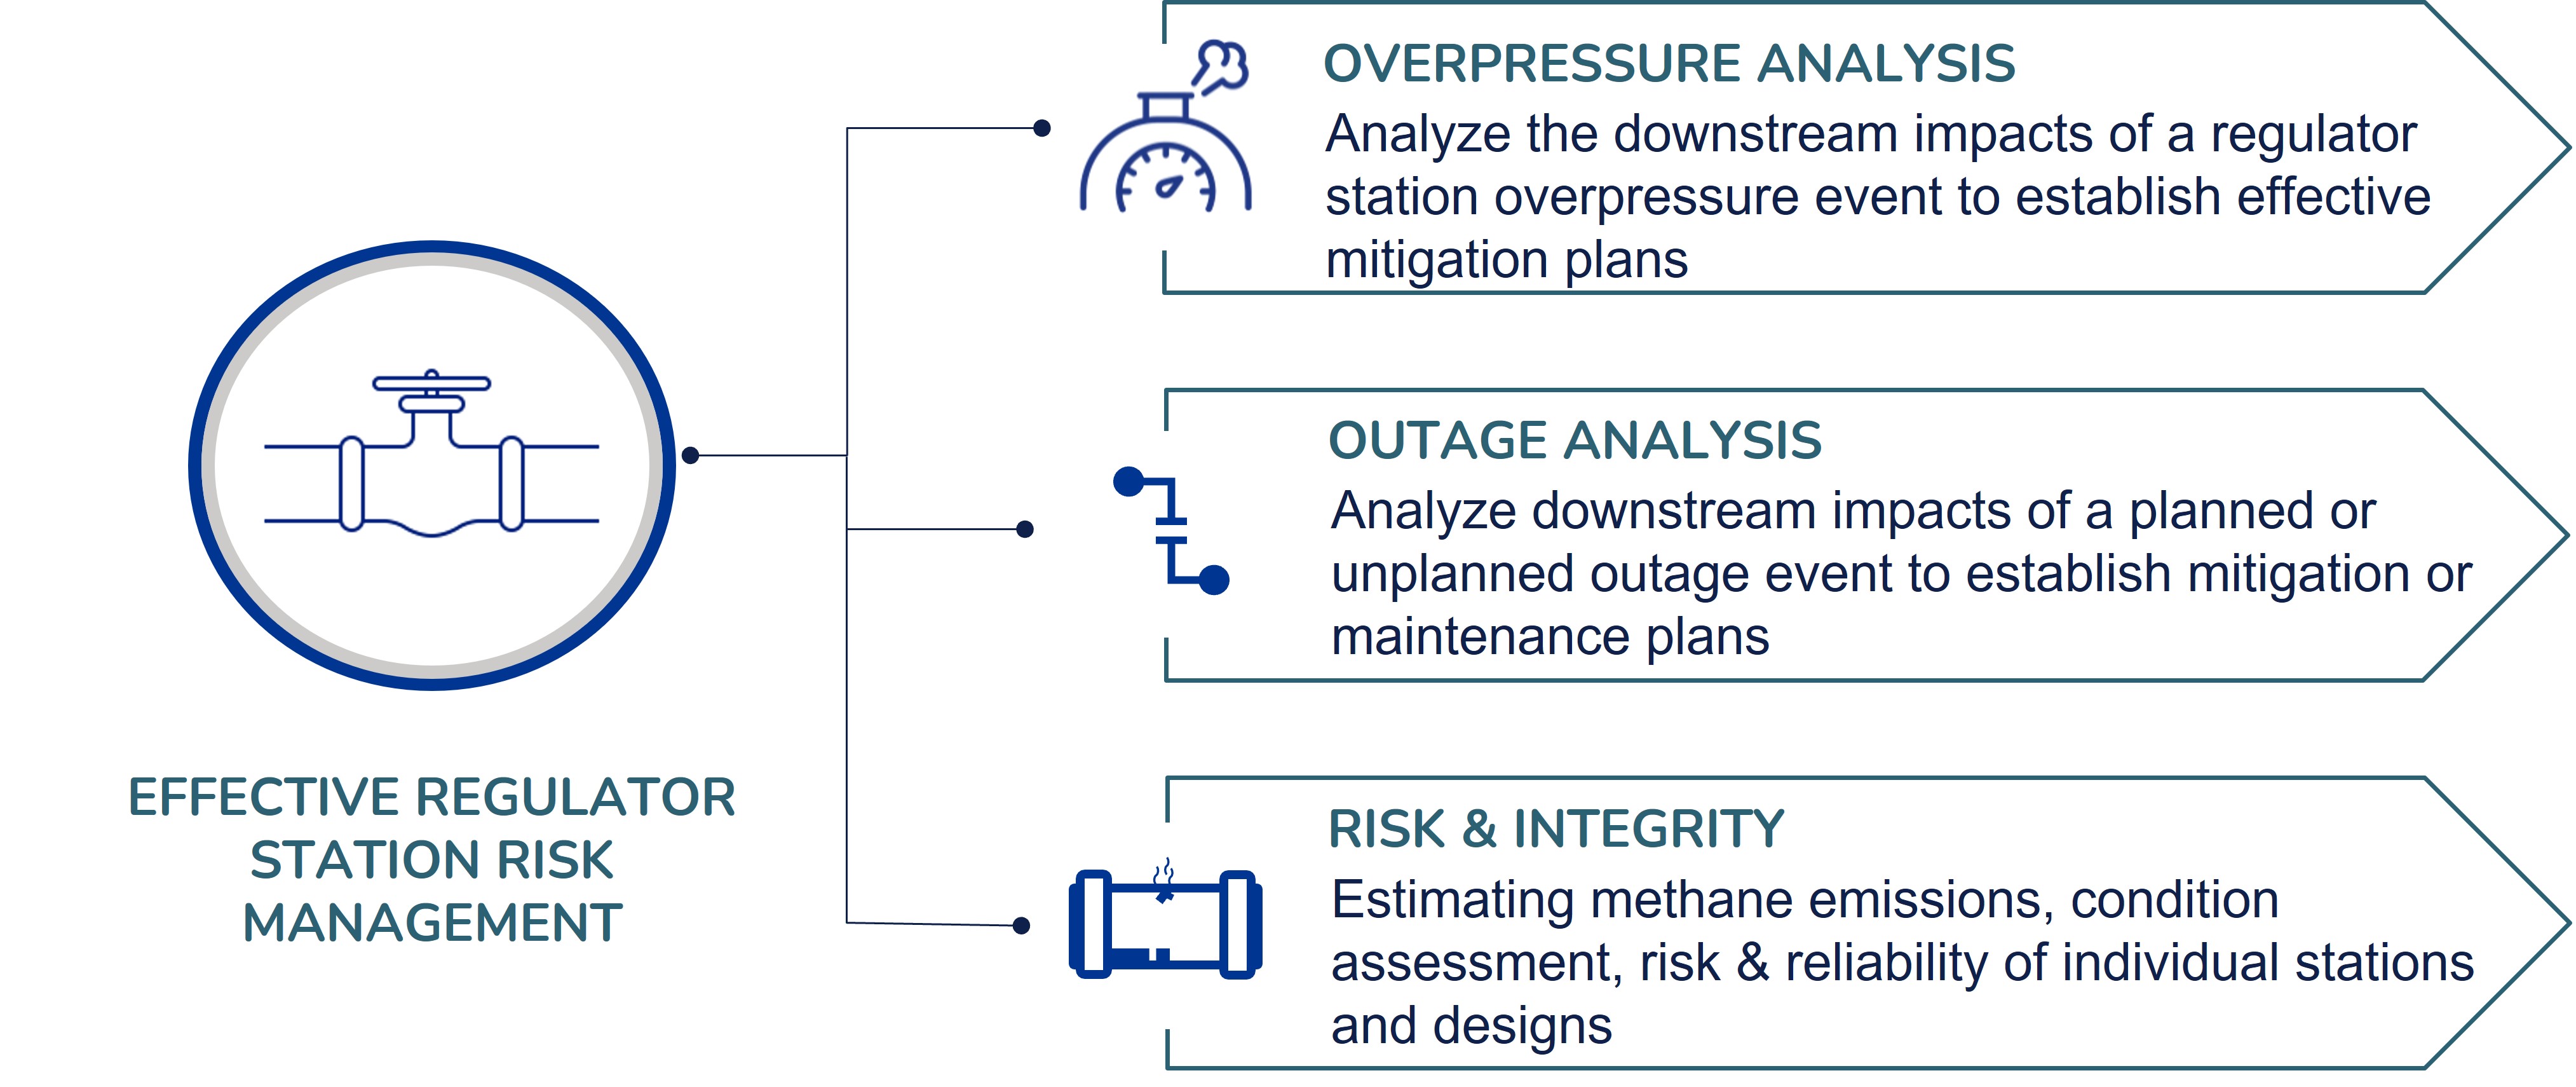 Pipeline - combining the power of risk, integrity, and hydraulic analysis